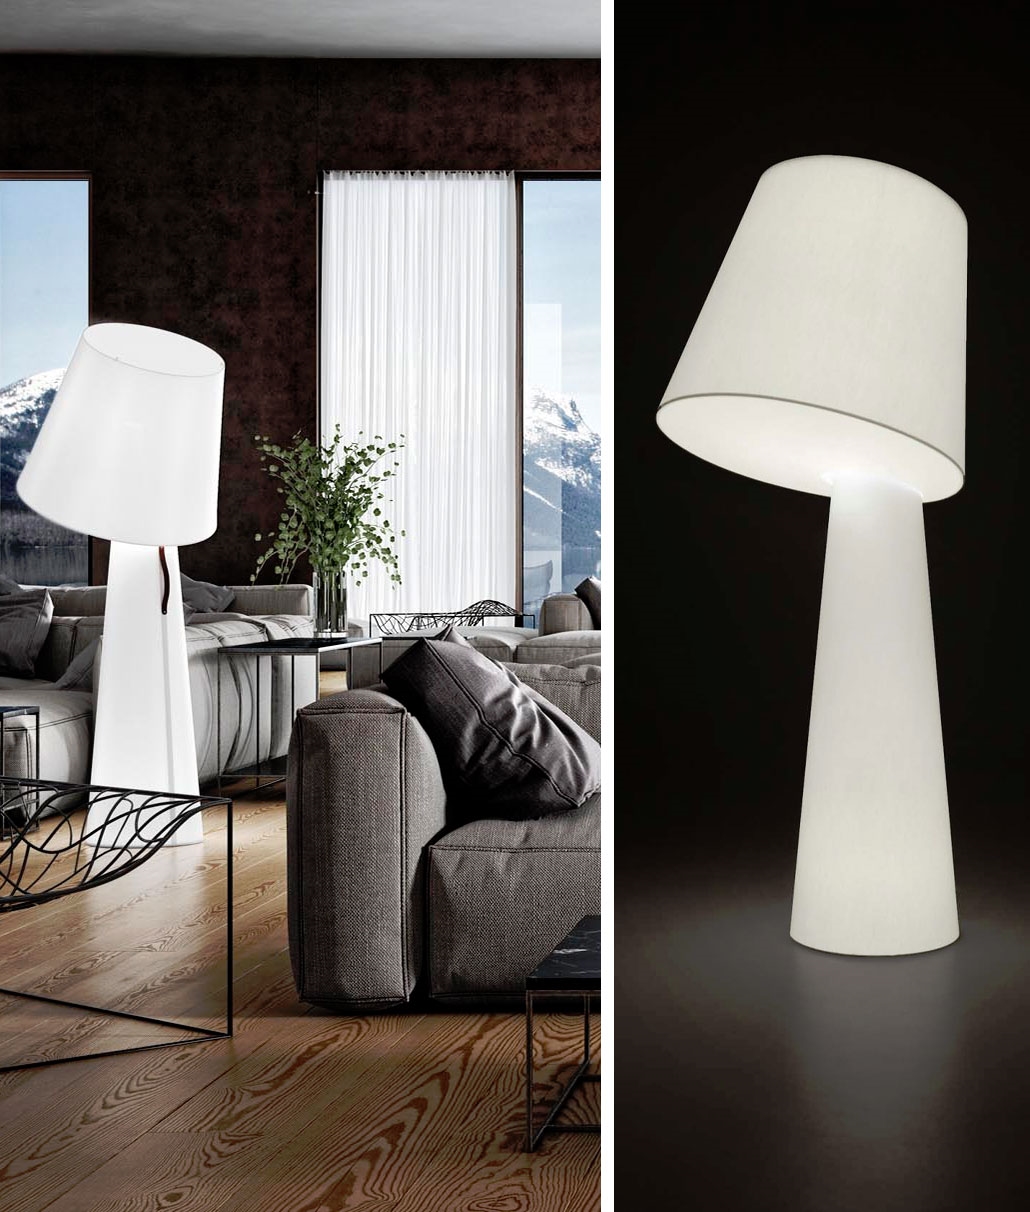 Soft Diffused Light, Large Light Shades For Floor Lamps